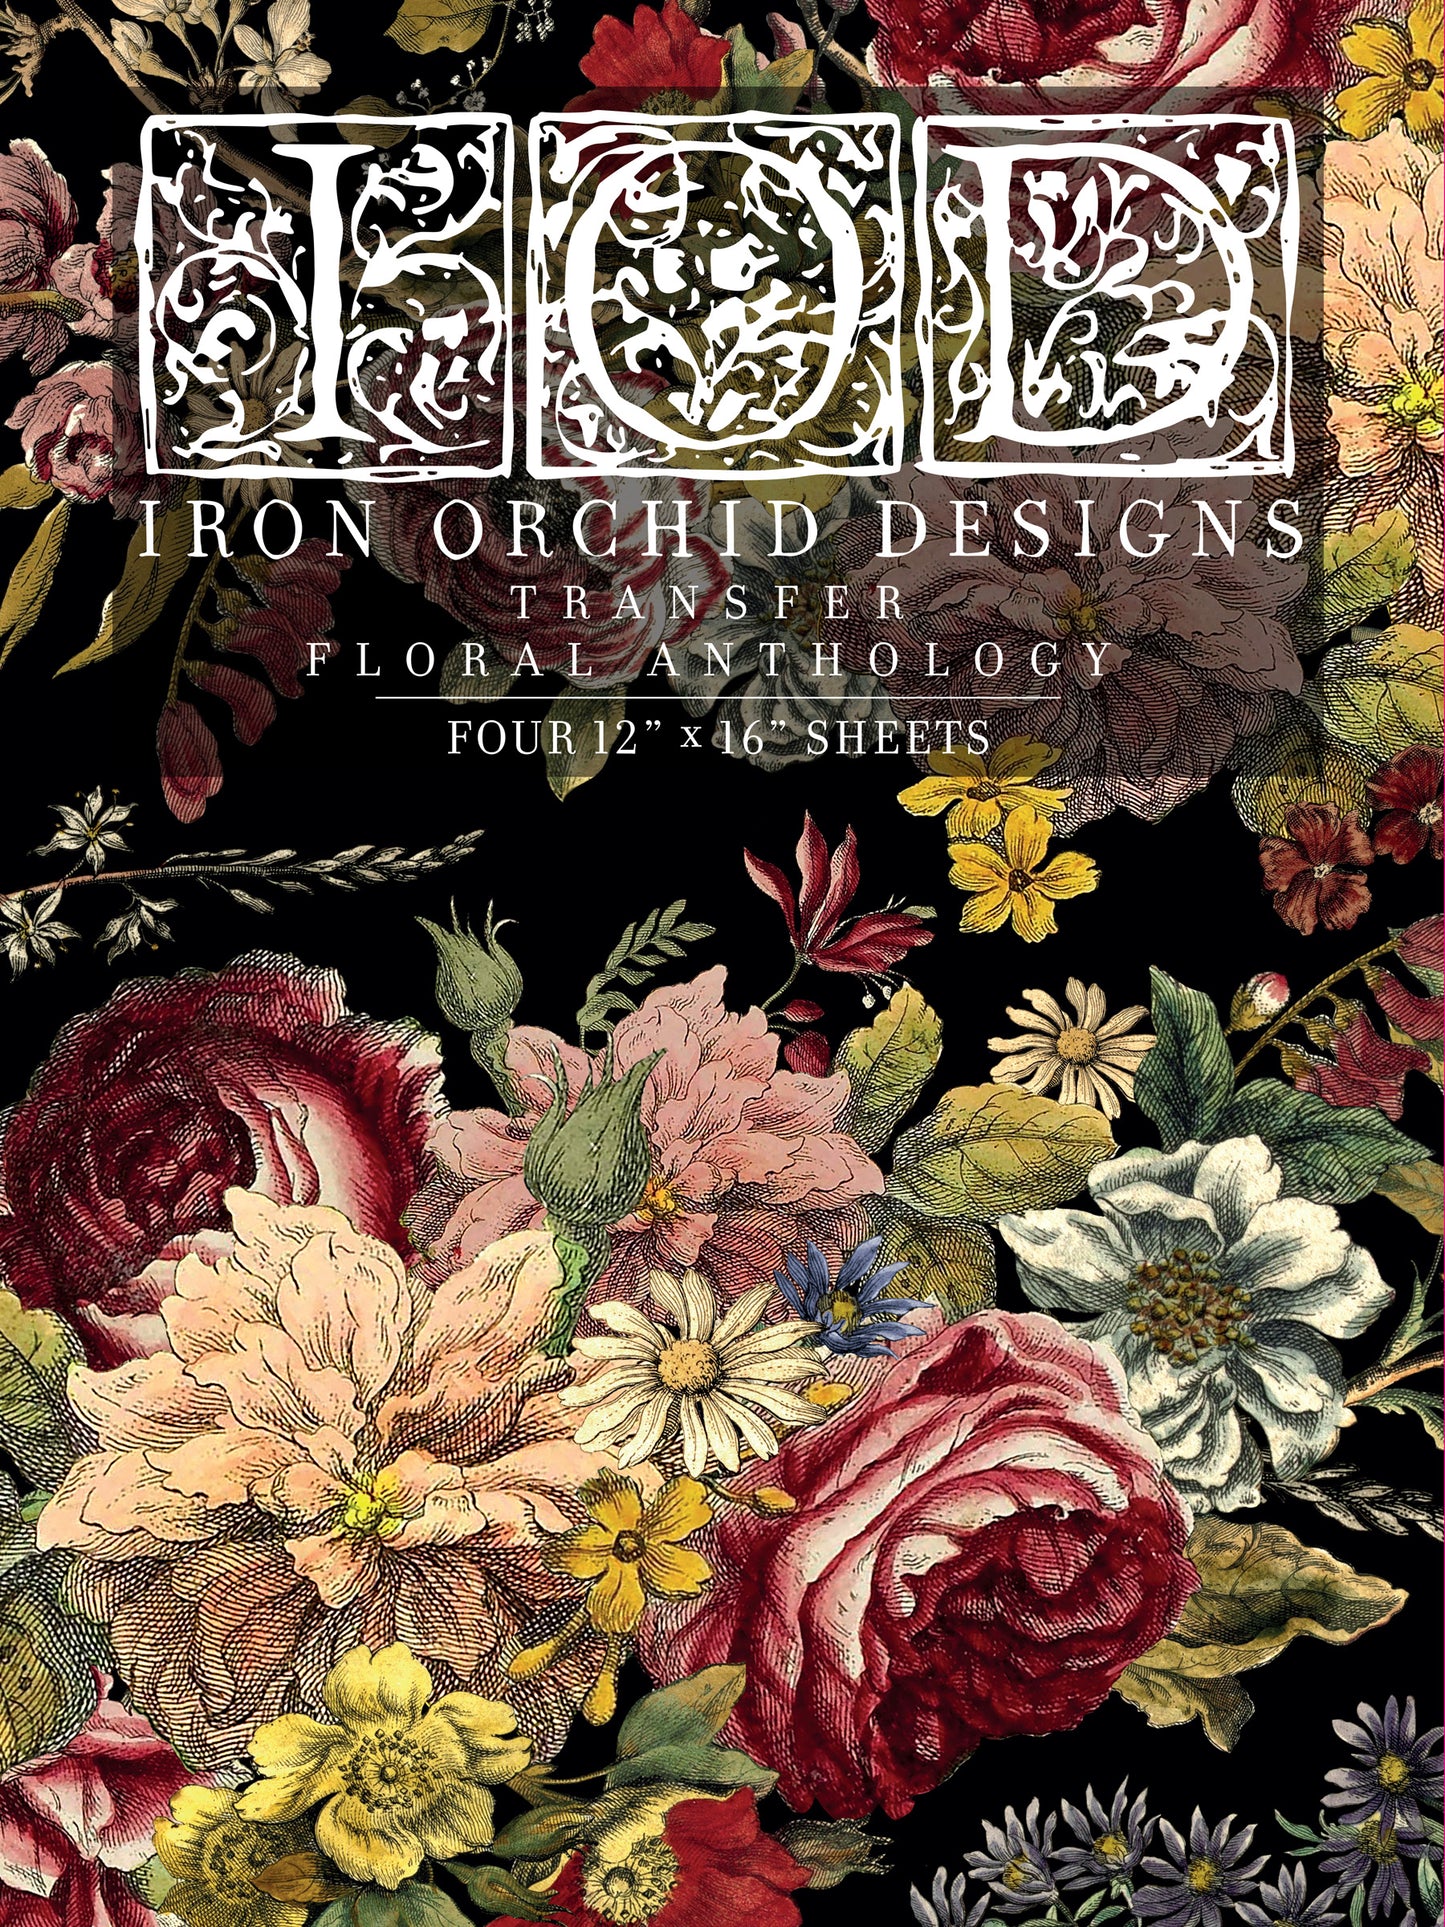 IOD Floral Anthology Transfer by Iron Orchid Designs